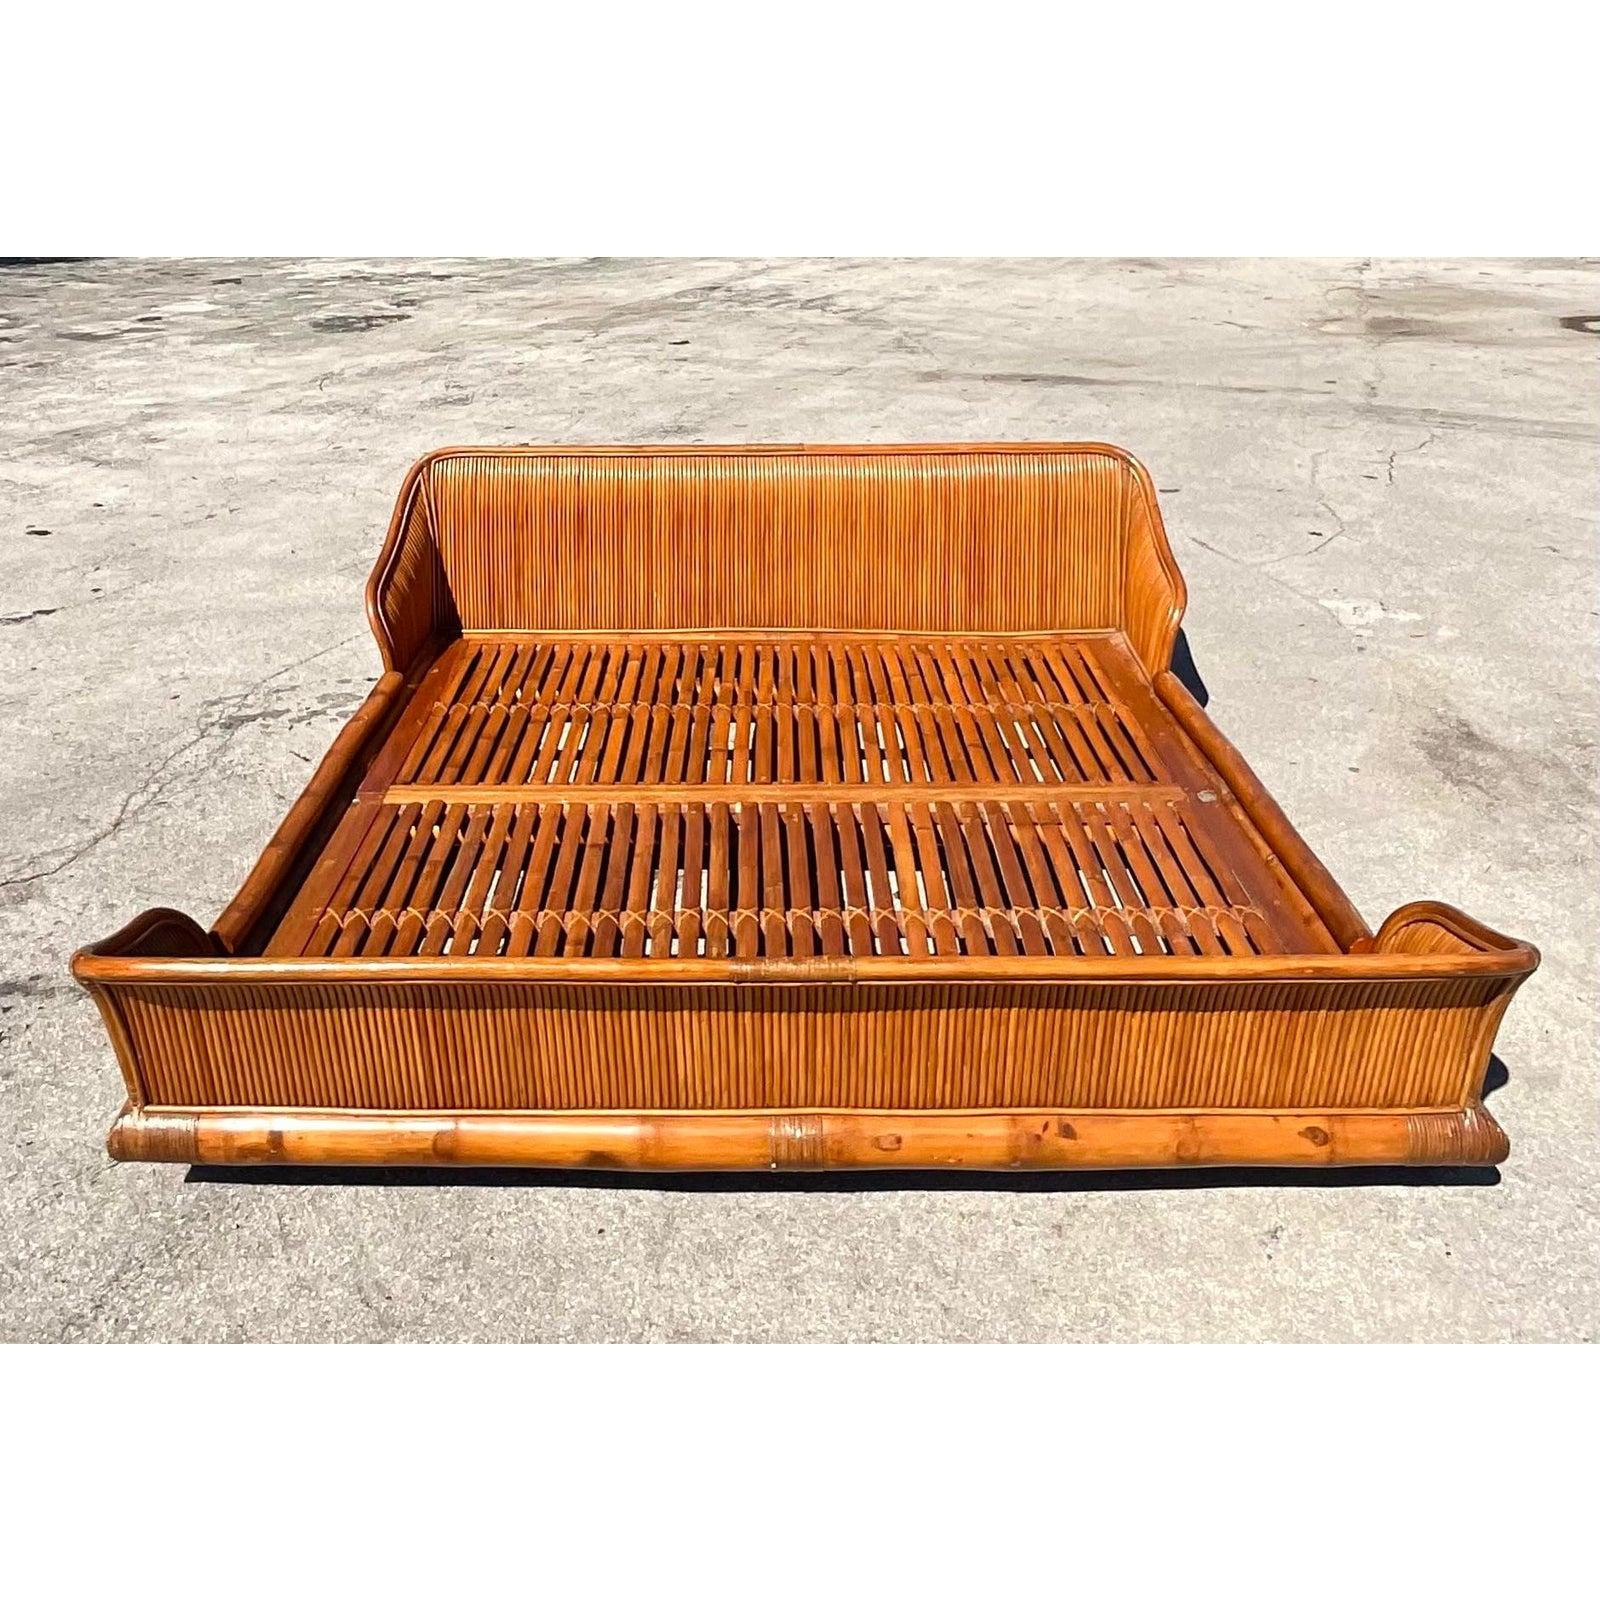 Incredible vintage Pretzel Reed king bed. Beautiful sleigh shape with beautiful sloping headboard and foot board. Natural slat rails. Acquired from a Palm Beach estate.